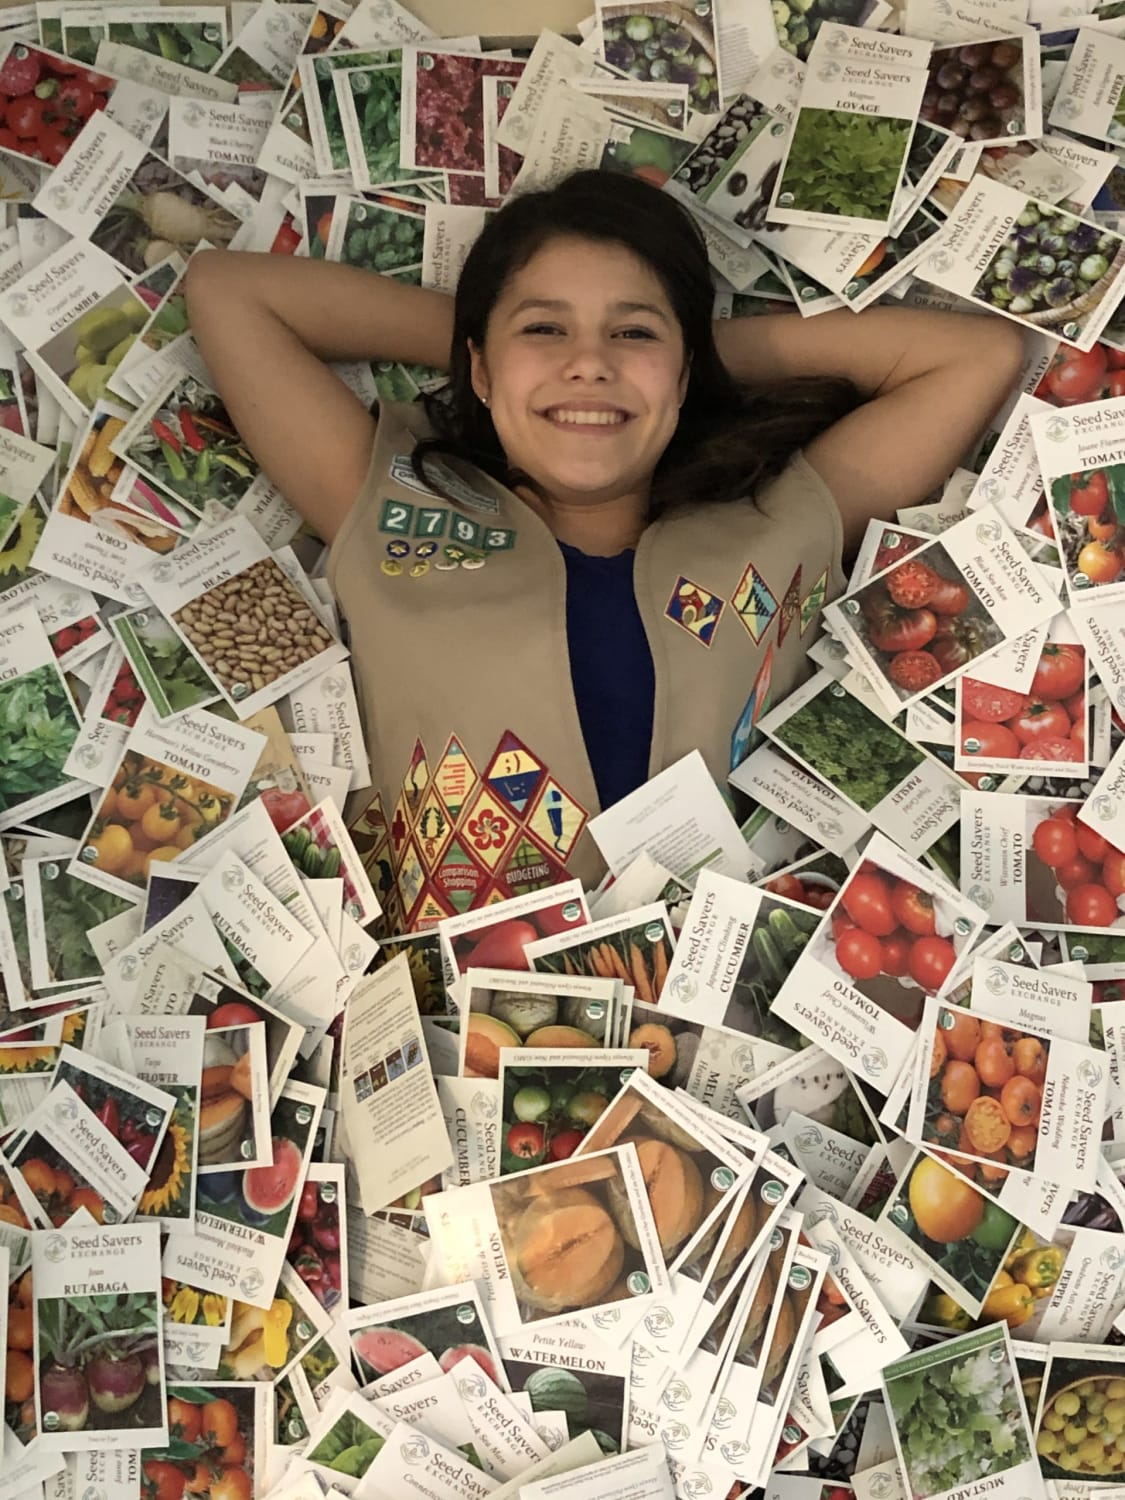 This Teenager Helped Launch Seed Libraries in Every State